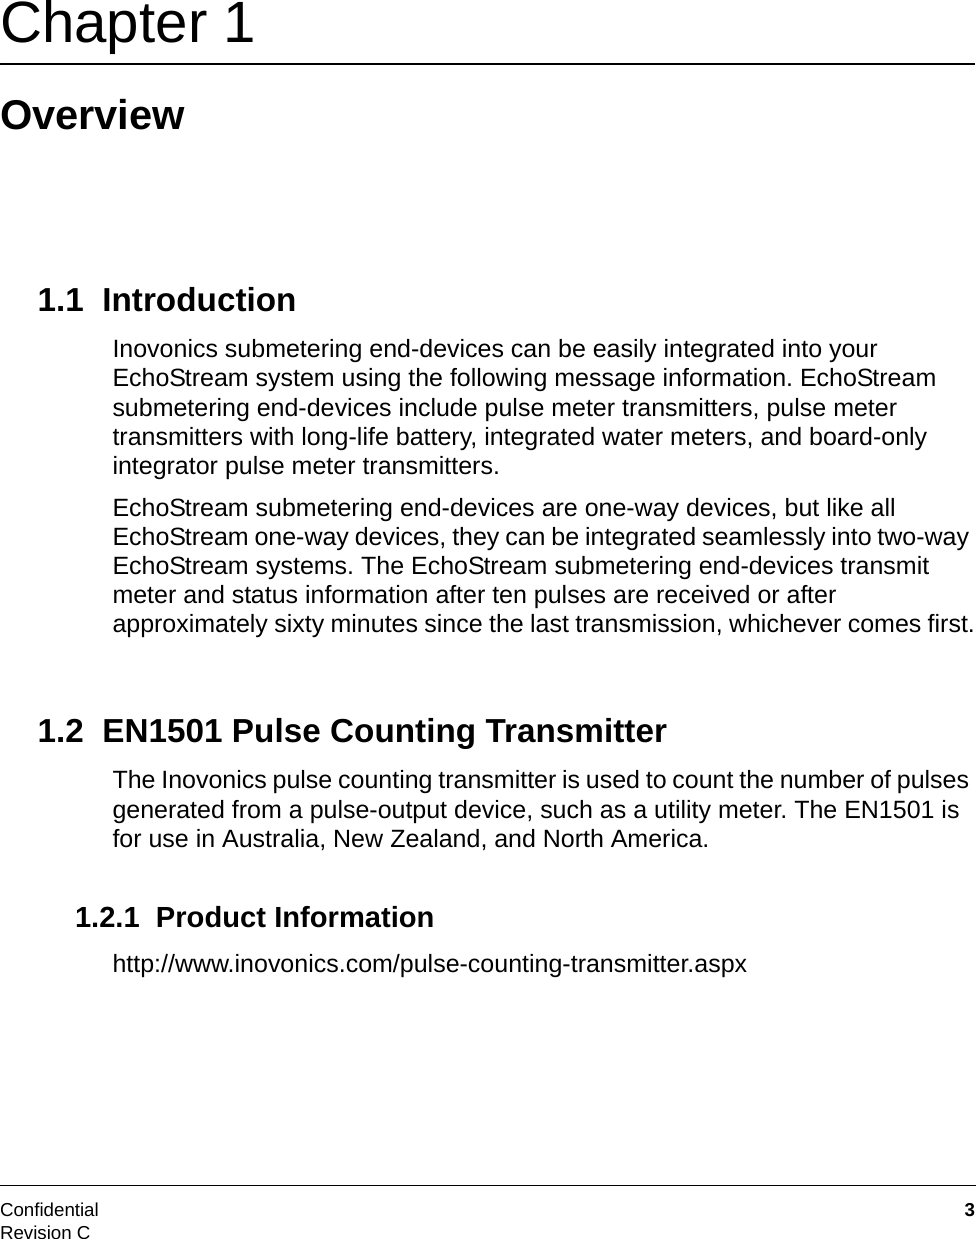 Confidential  3Revision CChapter 1 Overview1.1  IntroductionInovonics submetering end-devices can be easily integrated into your EchoStream system using the following message information. EchoStream submetering end-devices include pulse meter transmitters, pulse meter transmitters with long-life battery, integrated water meters, and board-only integrator pulse meter transmitters.EchoStream submetering end-devices are one-way devices, but like all EchoStream one-way devices, they can be integrated seamlessly into two-way EchoStream systems. The EchoStream submetering end-devices transmit meter and status information after ten pulses are received or after approximately sixty minutes since the last transmission, whichever comes first.1.2  EN1501 Pulse Counting TransmitterThe Inovonics pulse counting transmitter is used to count the number of pulses generated from a pulse-output device, such as a utility meter. The EN1501 is for use in Australia, New Zealand, and North America.1.2.1  Product Informationhttp://www.inovonics.com/pulse-counting-transmitter.aspx